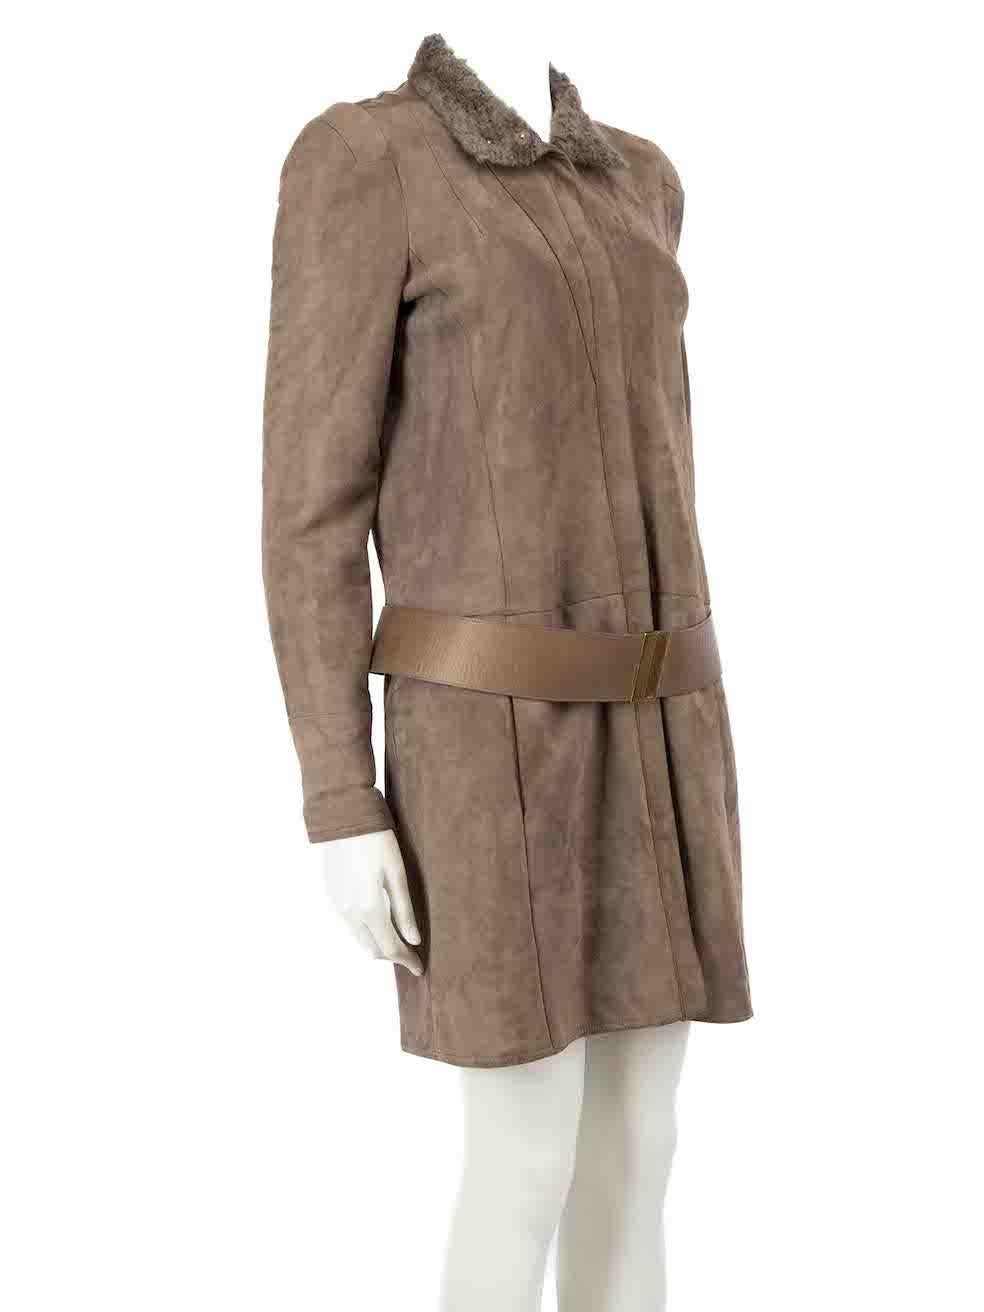 CONDITION is Very good. Minimal wear to the coat is evident. There is some pilling to the underside sleeves, and some scratches to the metal hardware on this used Gucci designer resale item.
 
Details
Brown
Suede
Coat
Shearling lined
Zip